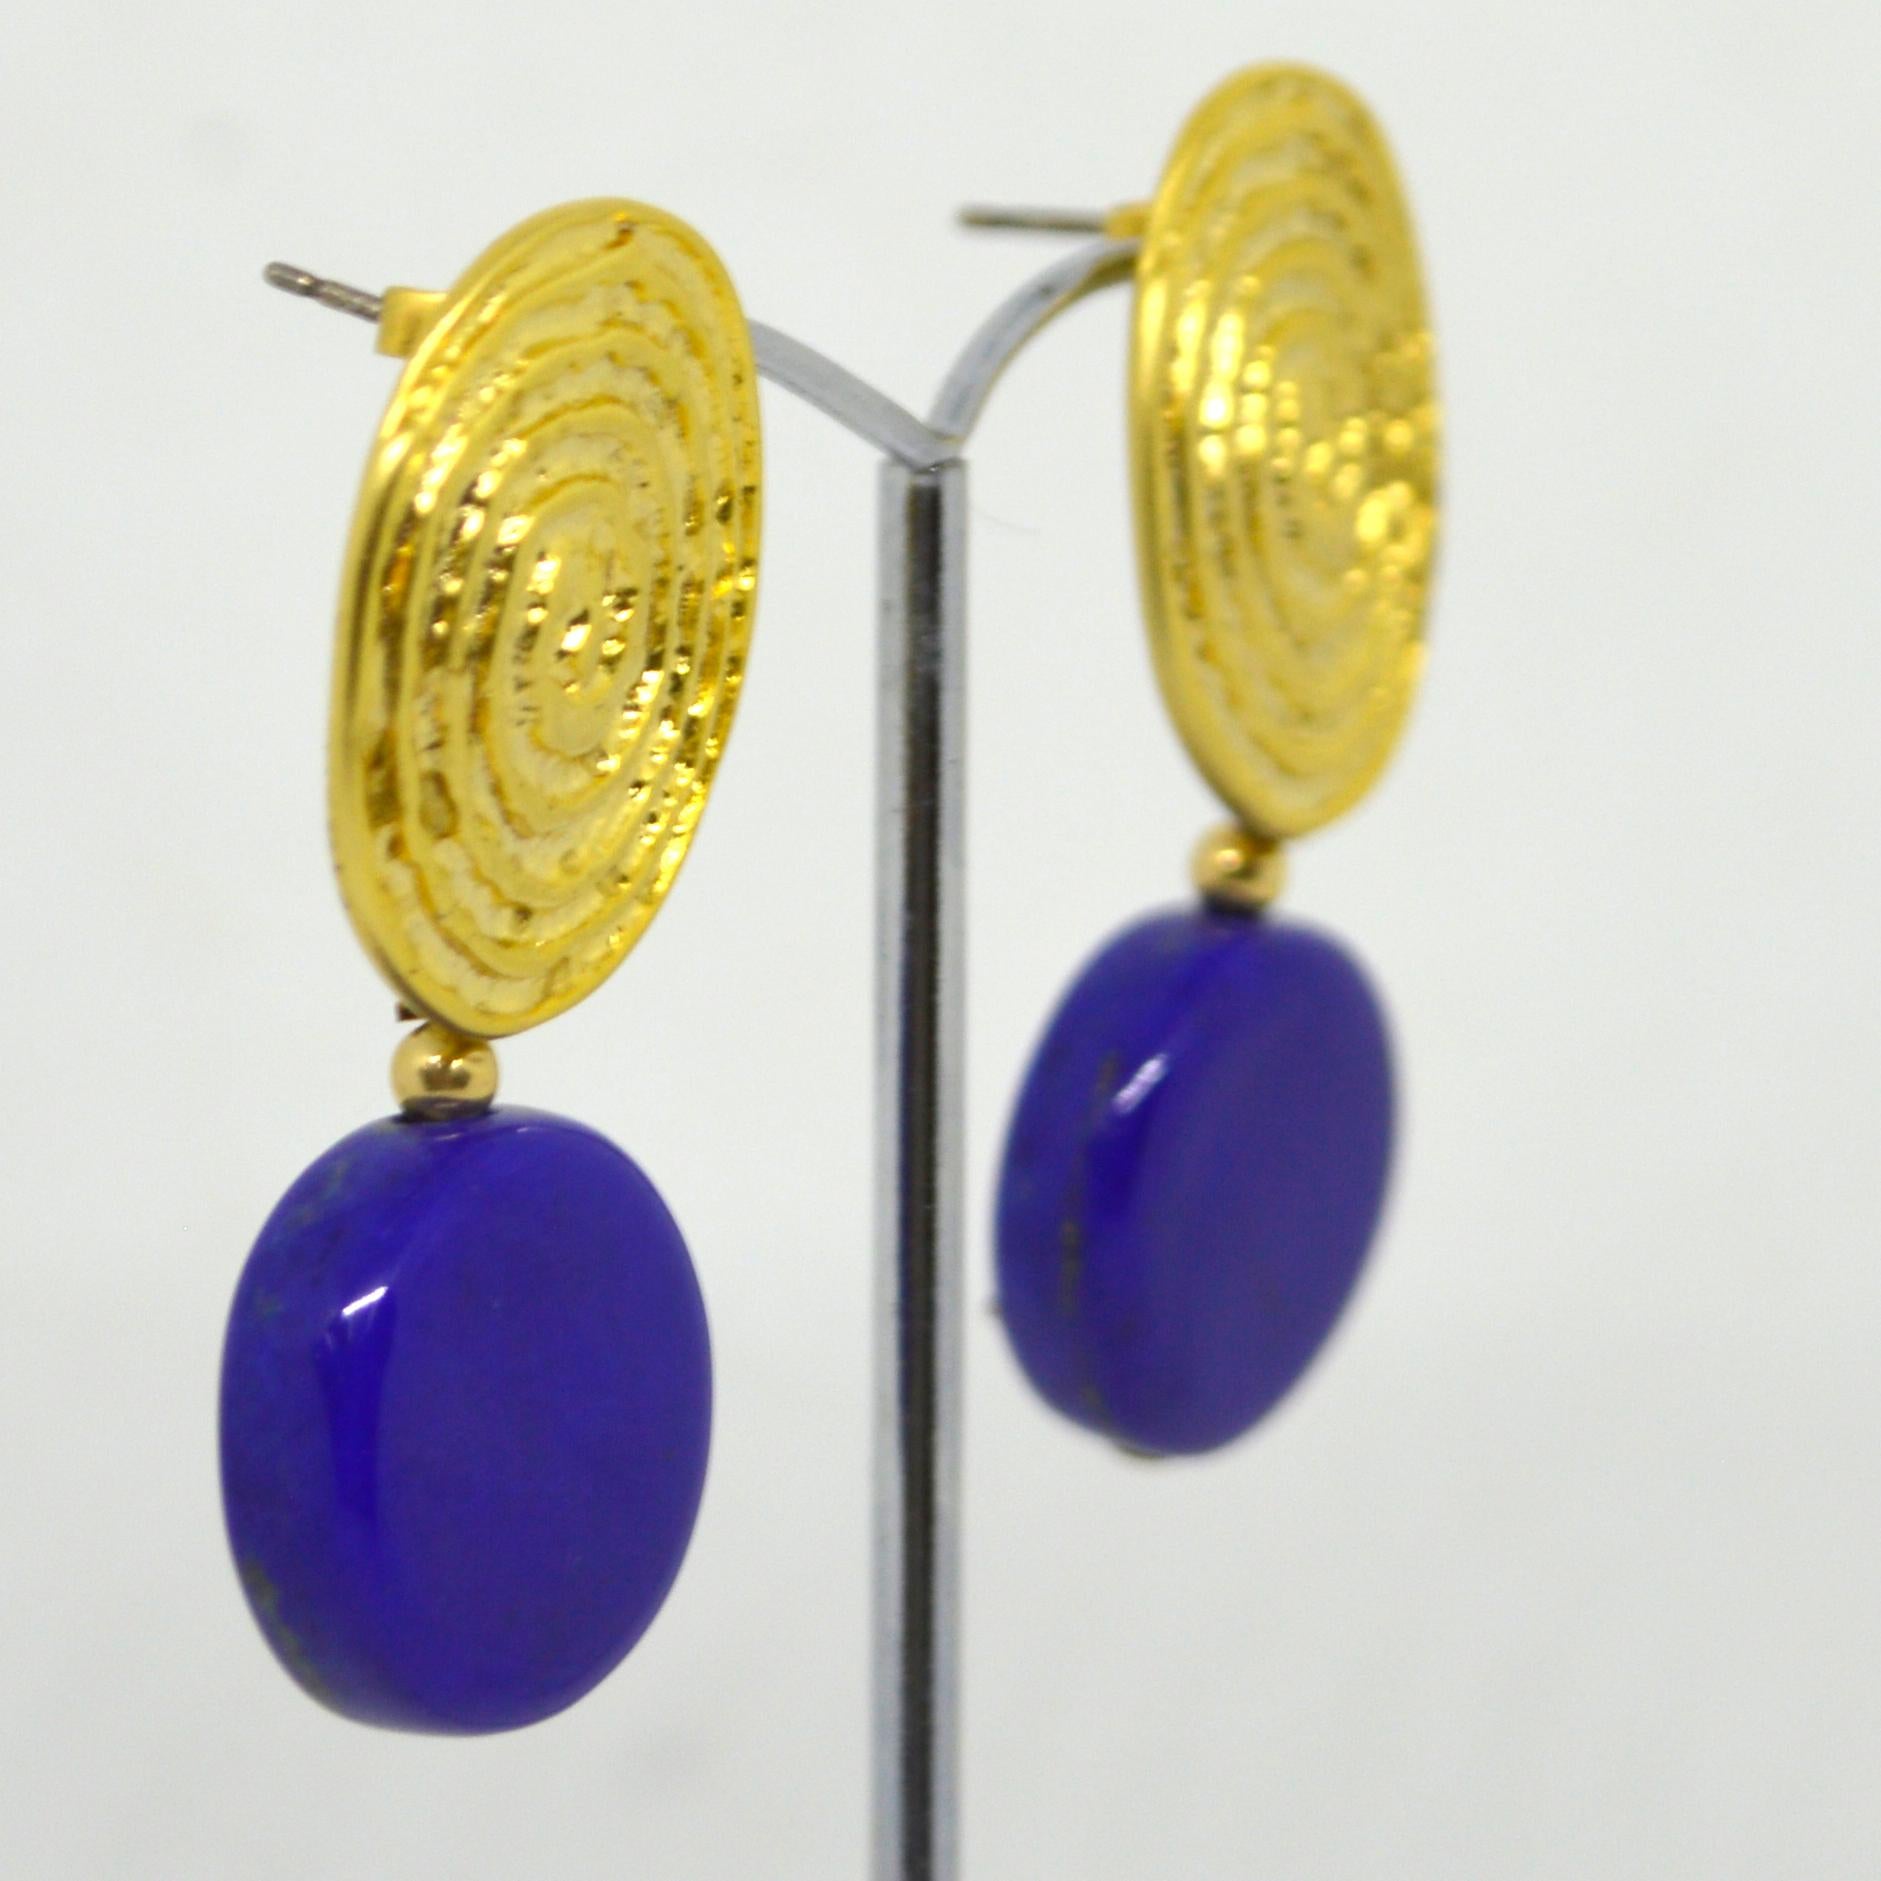 Decadent Jewels Lapis Lazuli Coil Gold Stud Earrings

Lapis Lazuli Flat Round Polished 20mm 
Gold Plate Brass Stud Sterling Silver Post 21x24mm
14k Gold Filled Headpin and 3mm round beads.
Weight 14.66gr
Total Earring length 4.5mm / 1.77 inches
